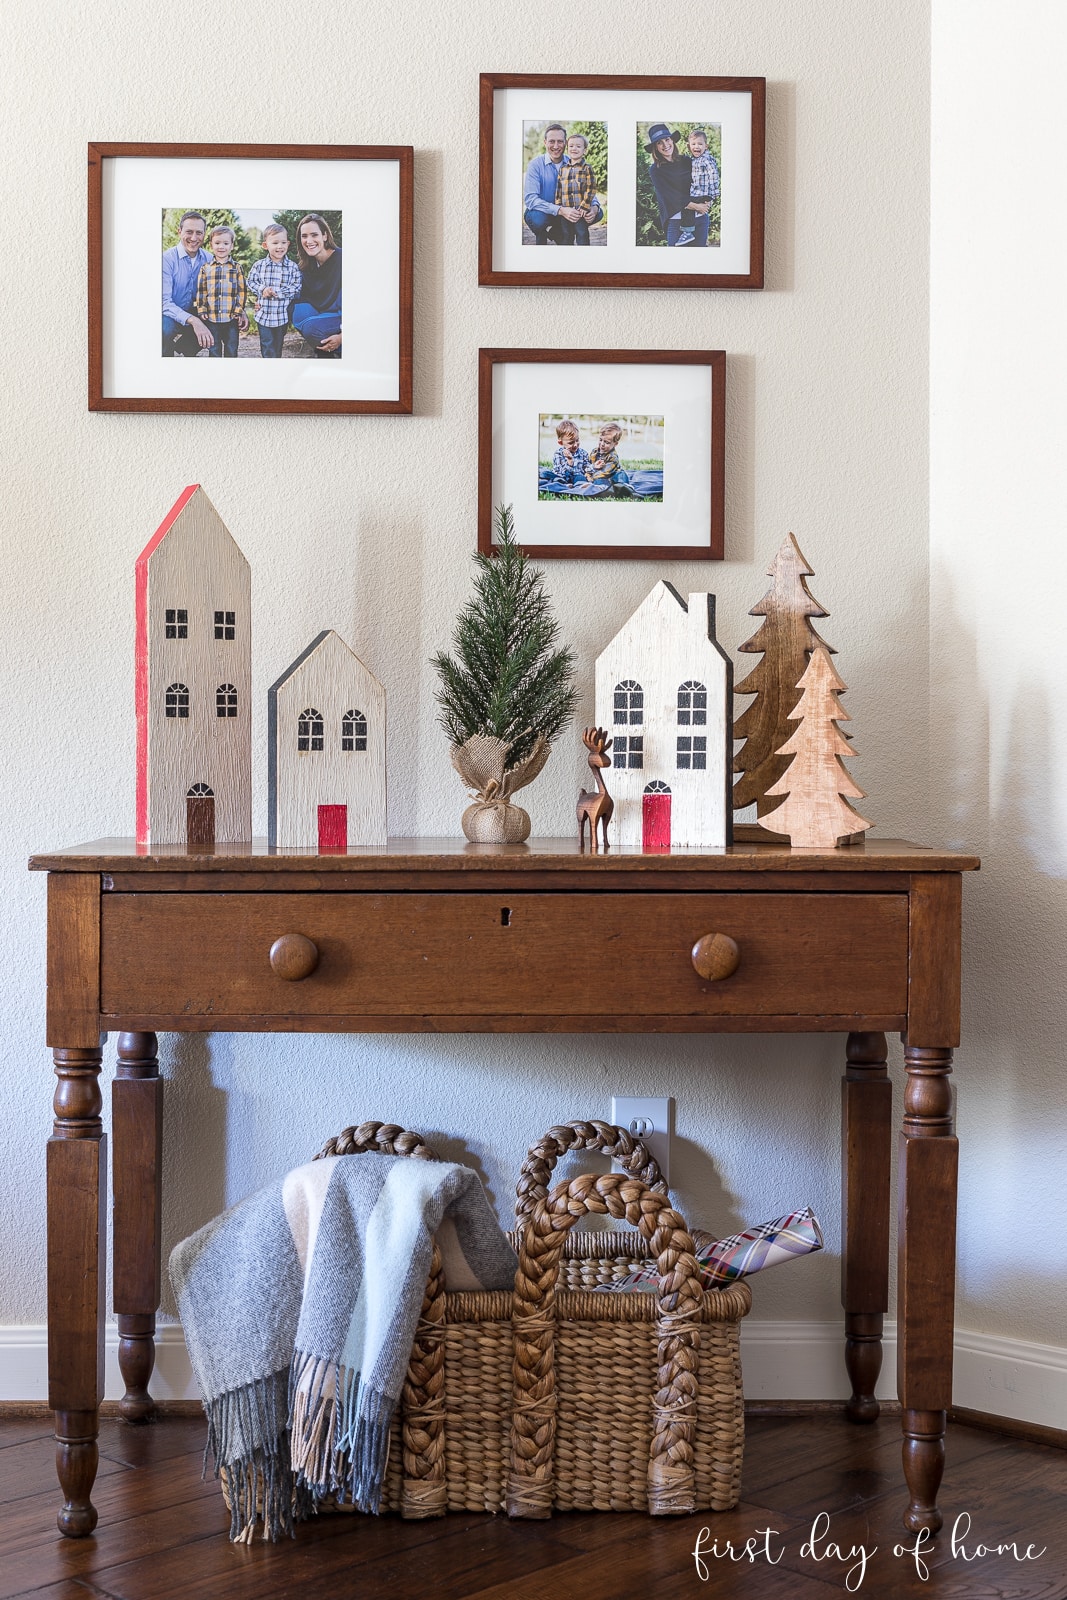 Christmas village with wooden houses and wooden trees on table